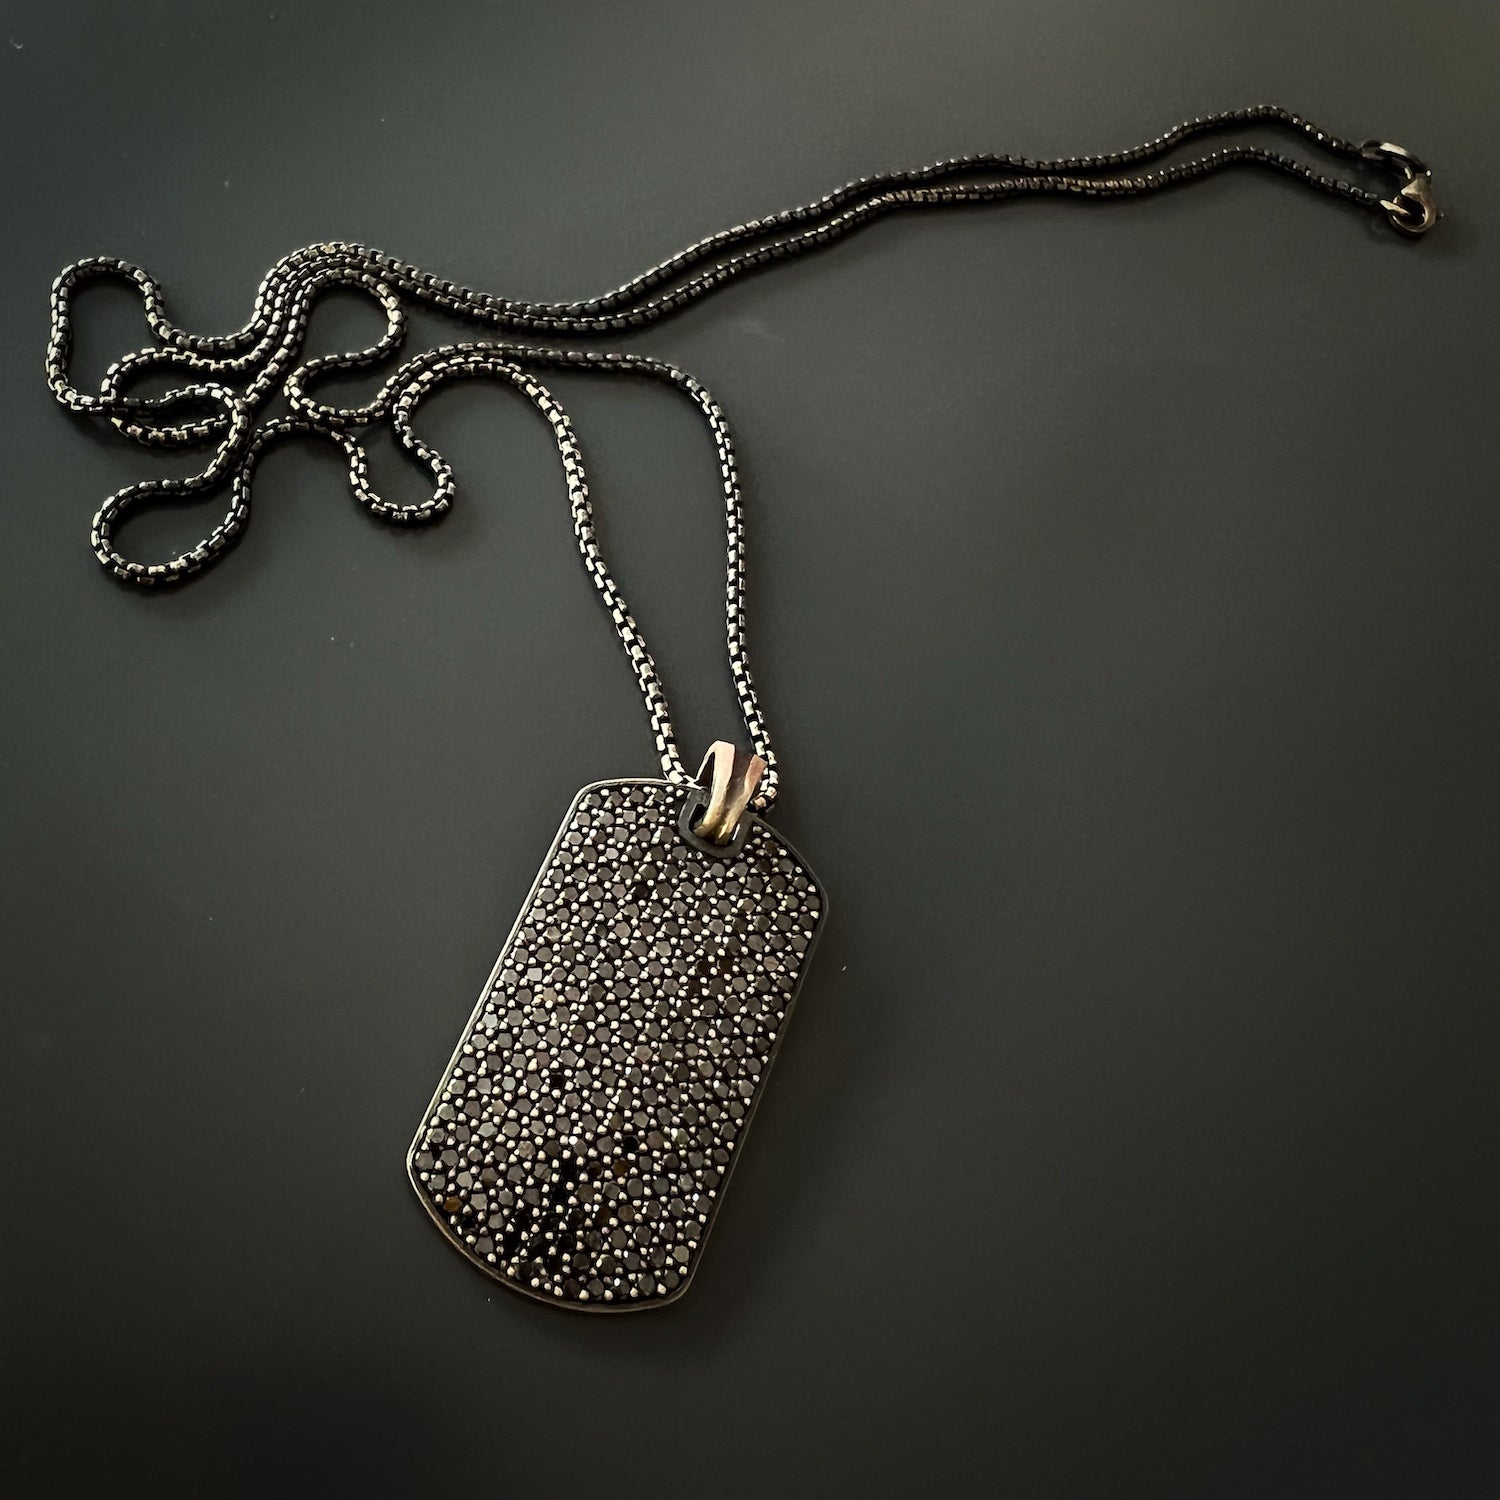 Close-up of the pendant&#39;s black diamond pave, capturing the intricate details and luxurious sparkle of the necklace.